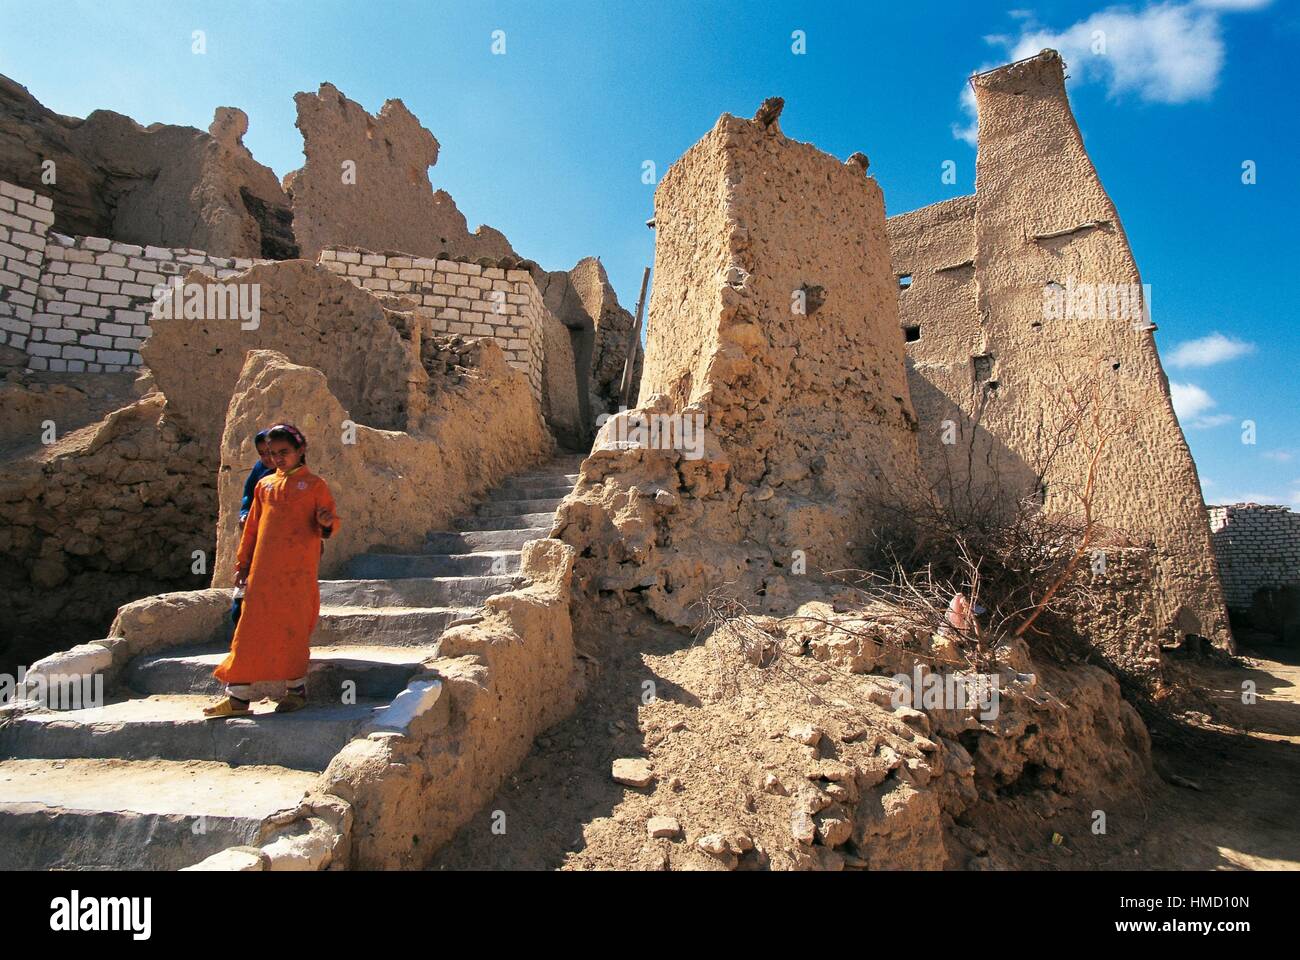 A girl in front of the ruins of a 14th-century mosque, the village of Shali, Siwa Oasis, Egypt. Stock Photo